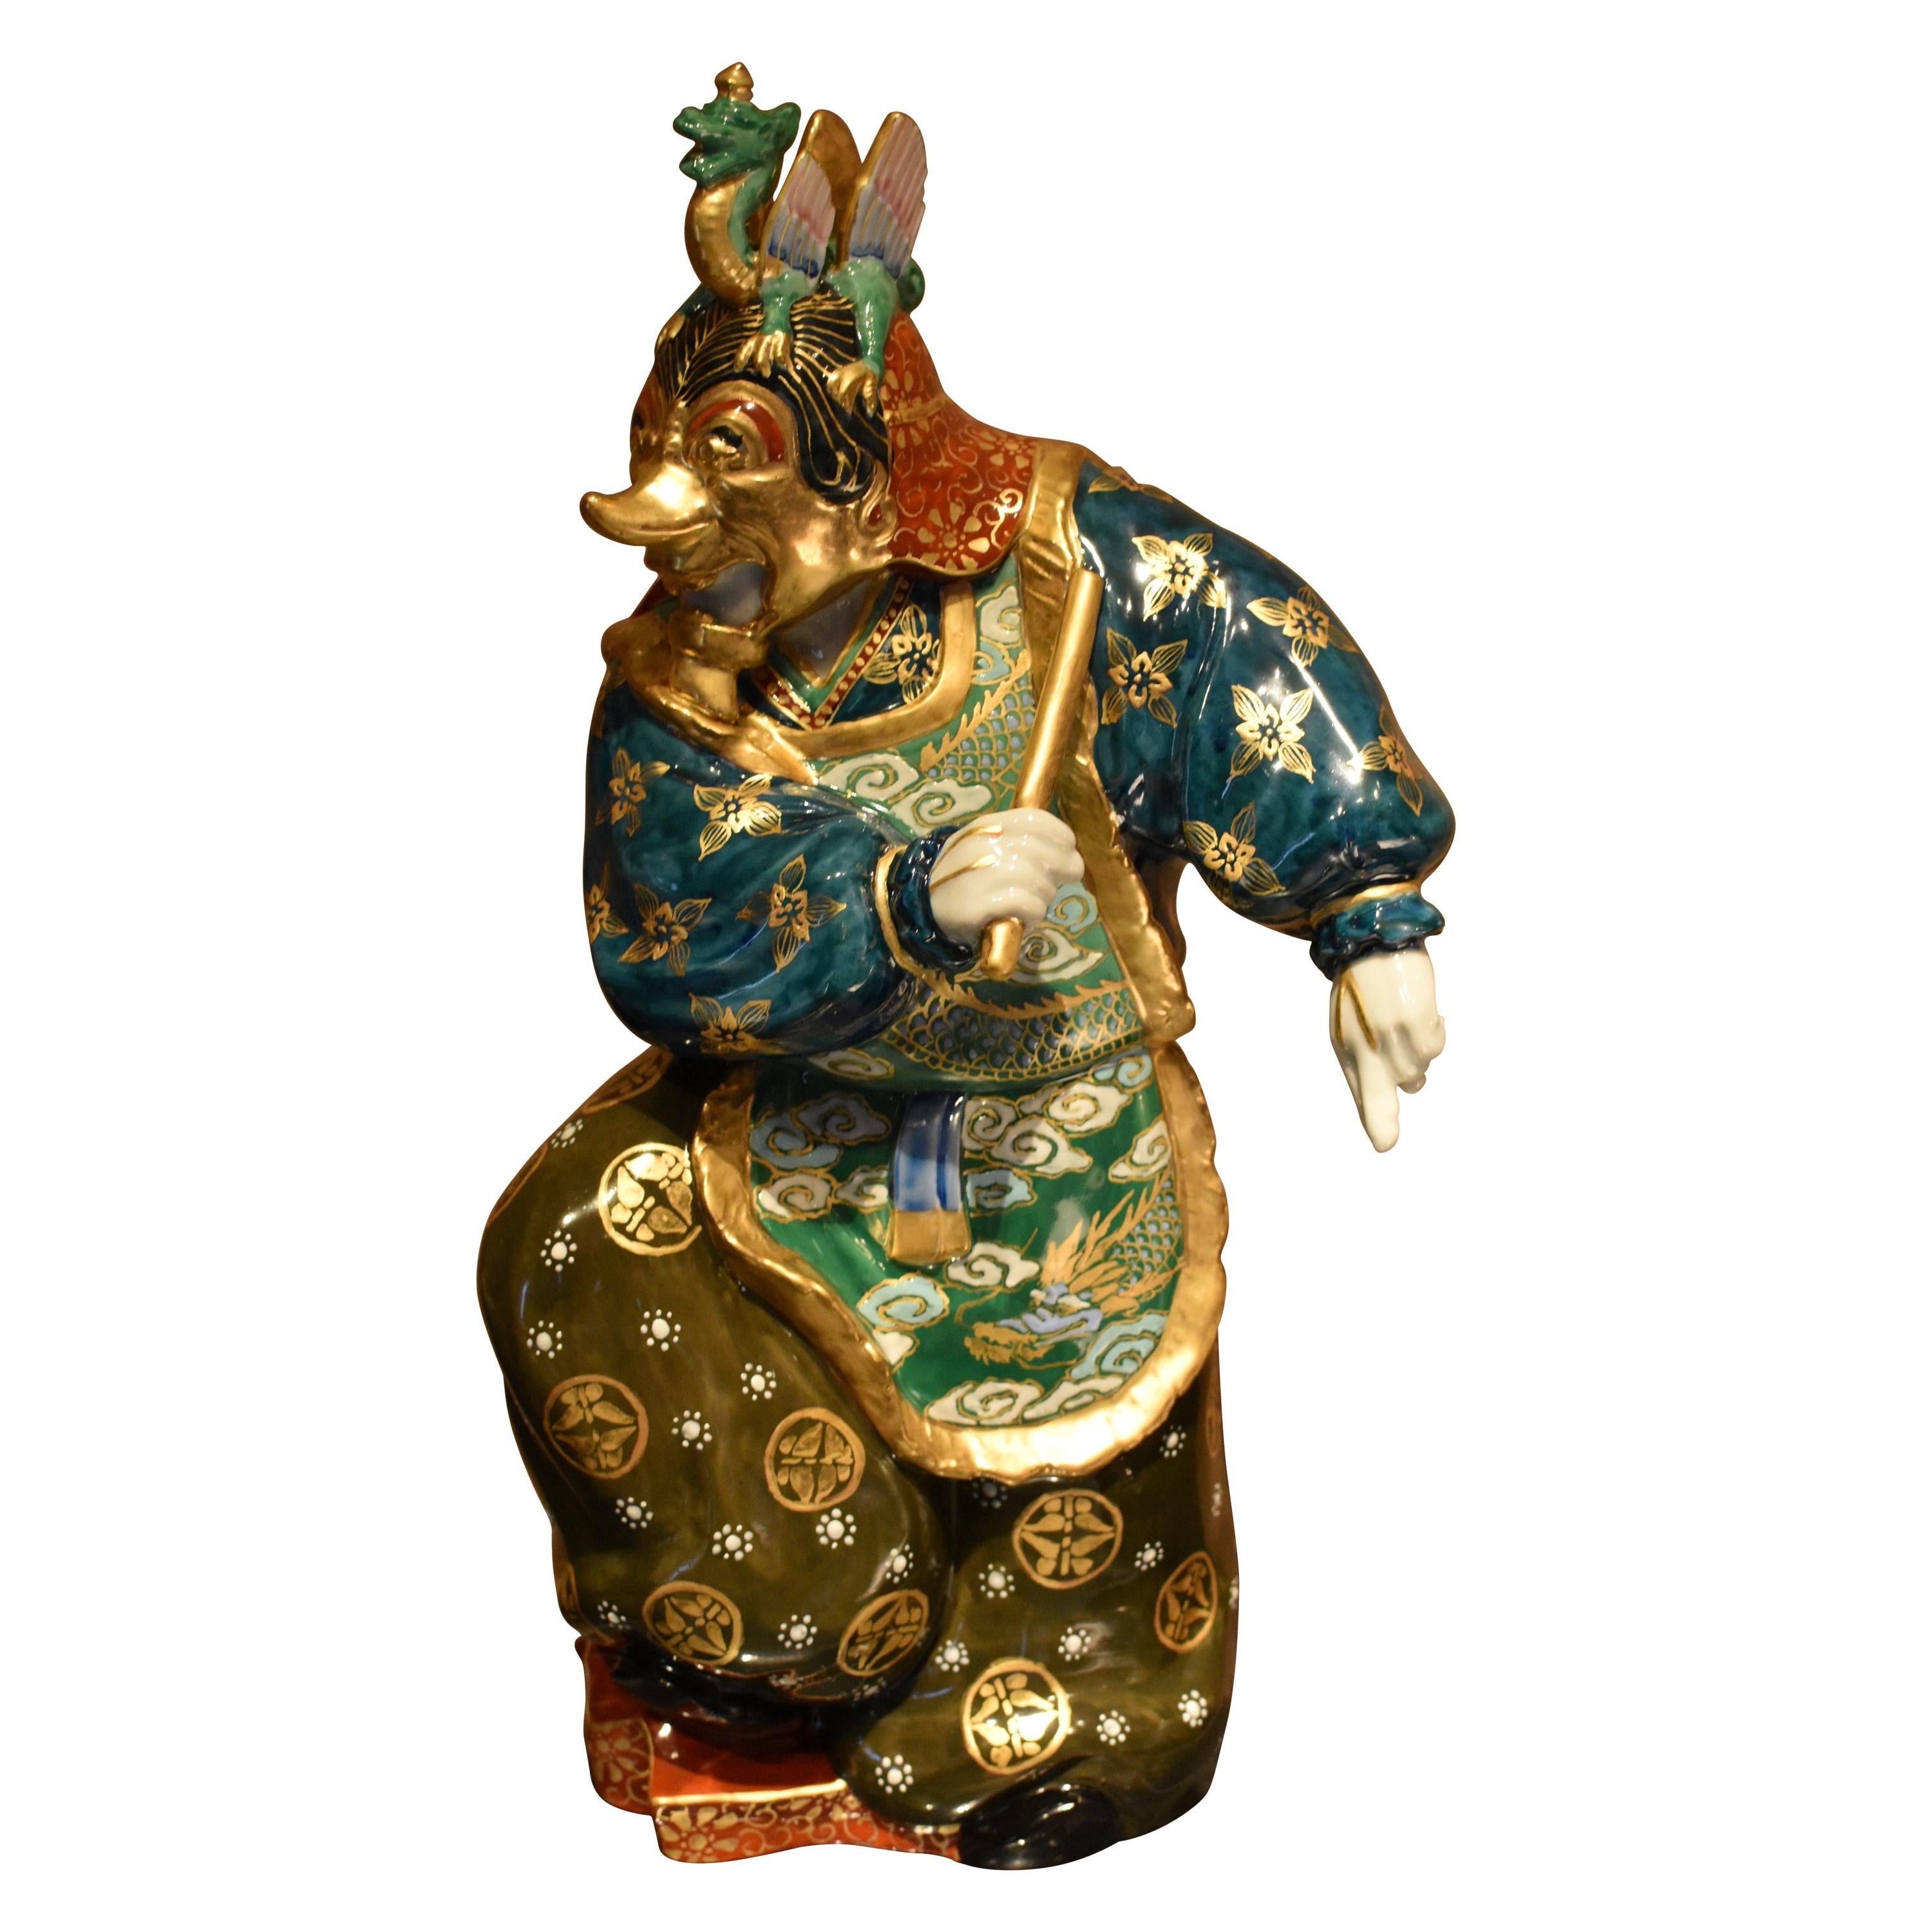 Porcelain Figurine Gold Green by Contemporary Japanese Master Artist For Sale